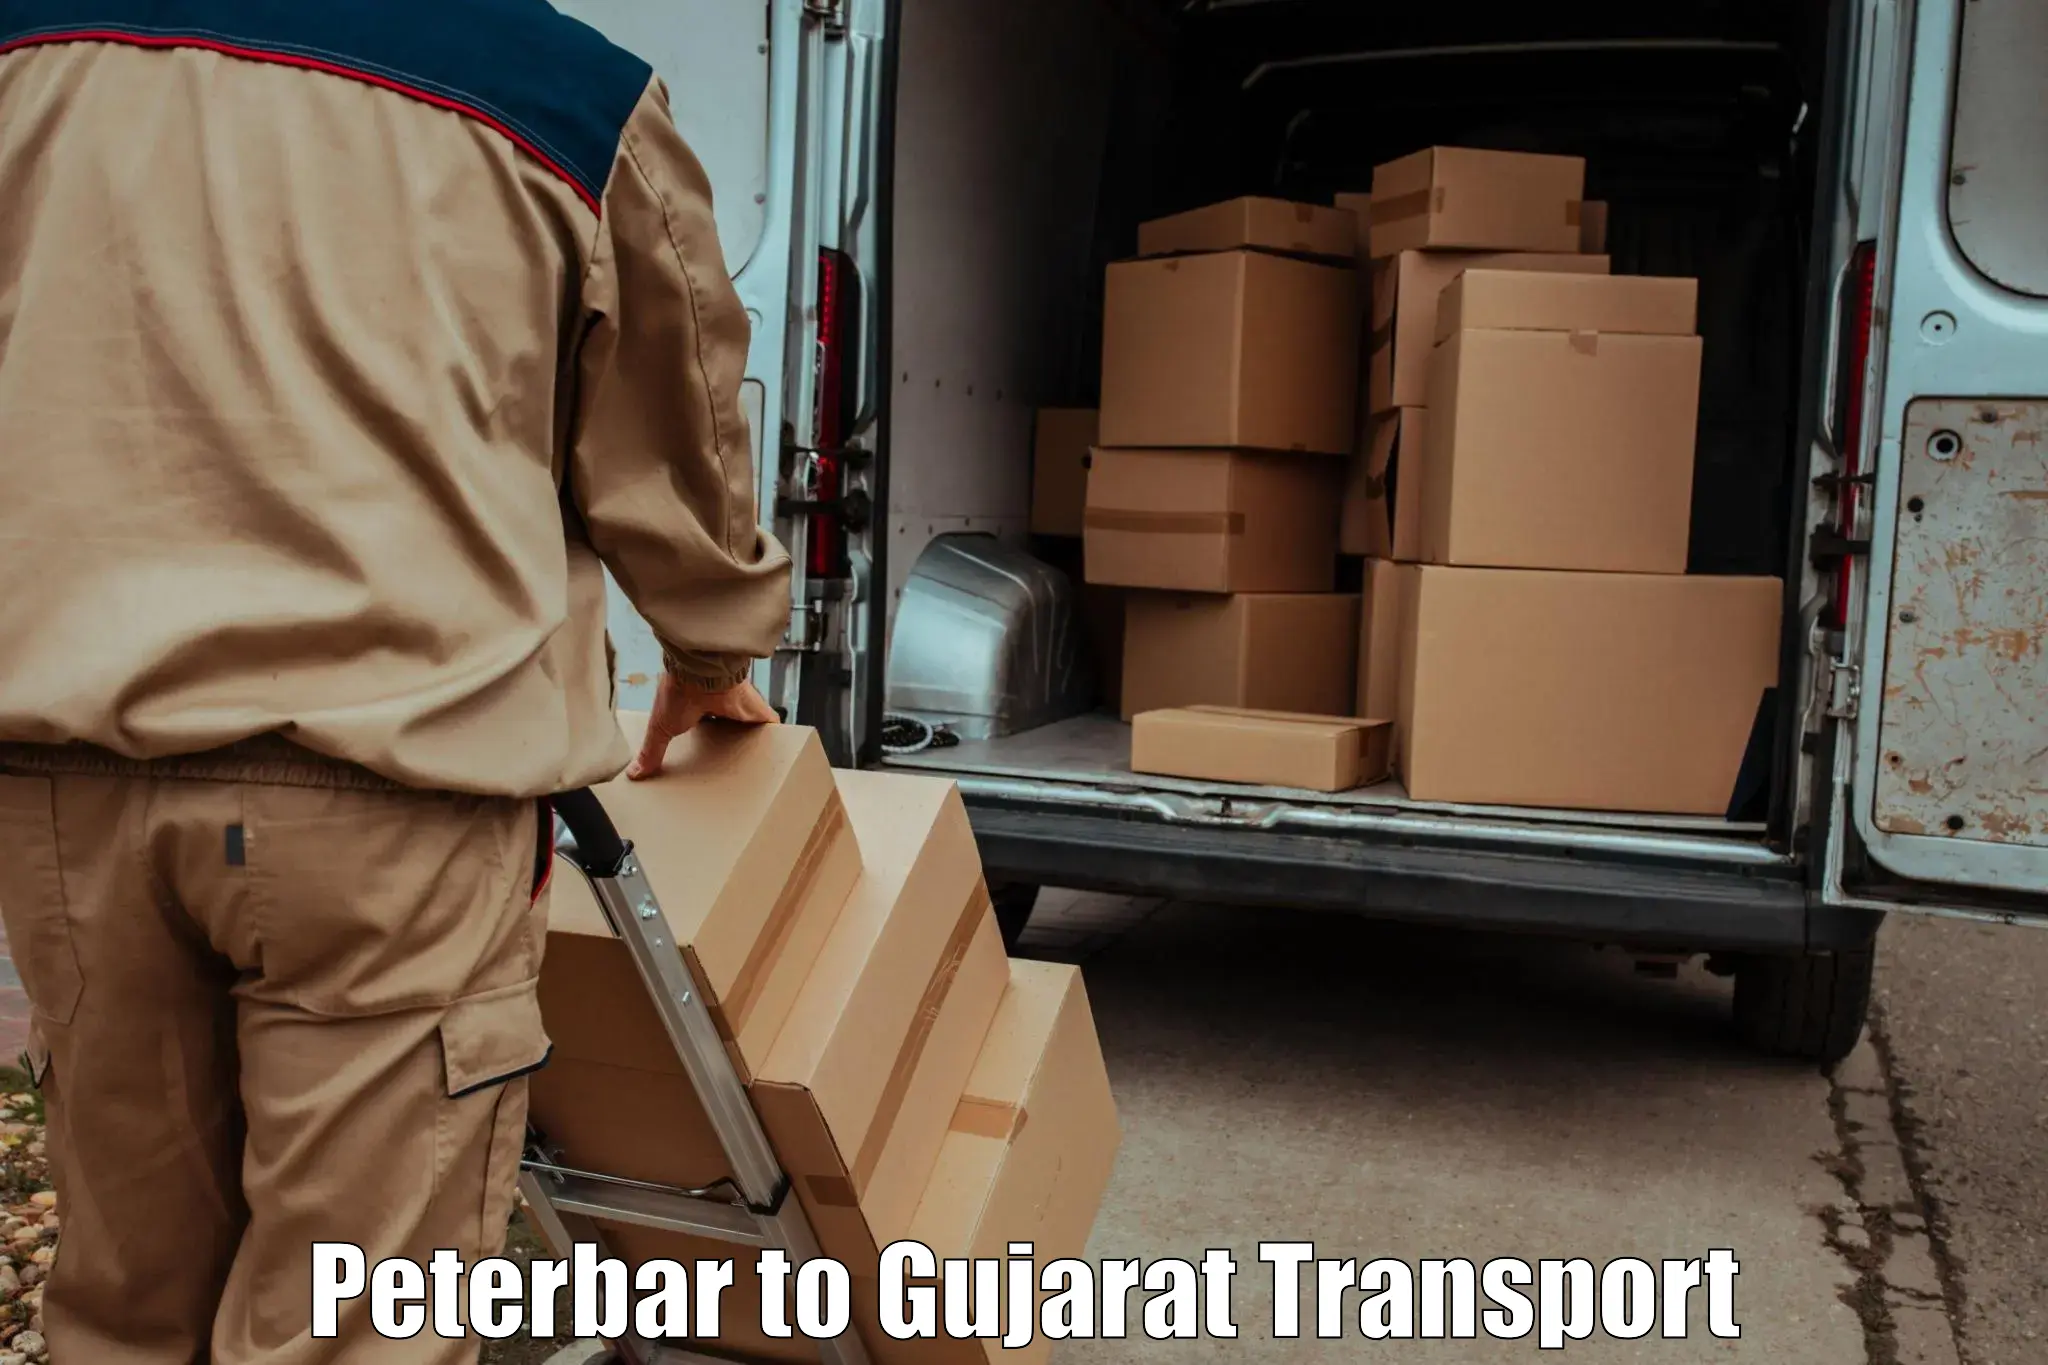 Transport bike from one state to another Peterbar to Gujarat